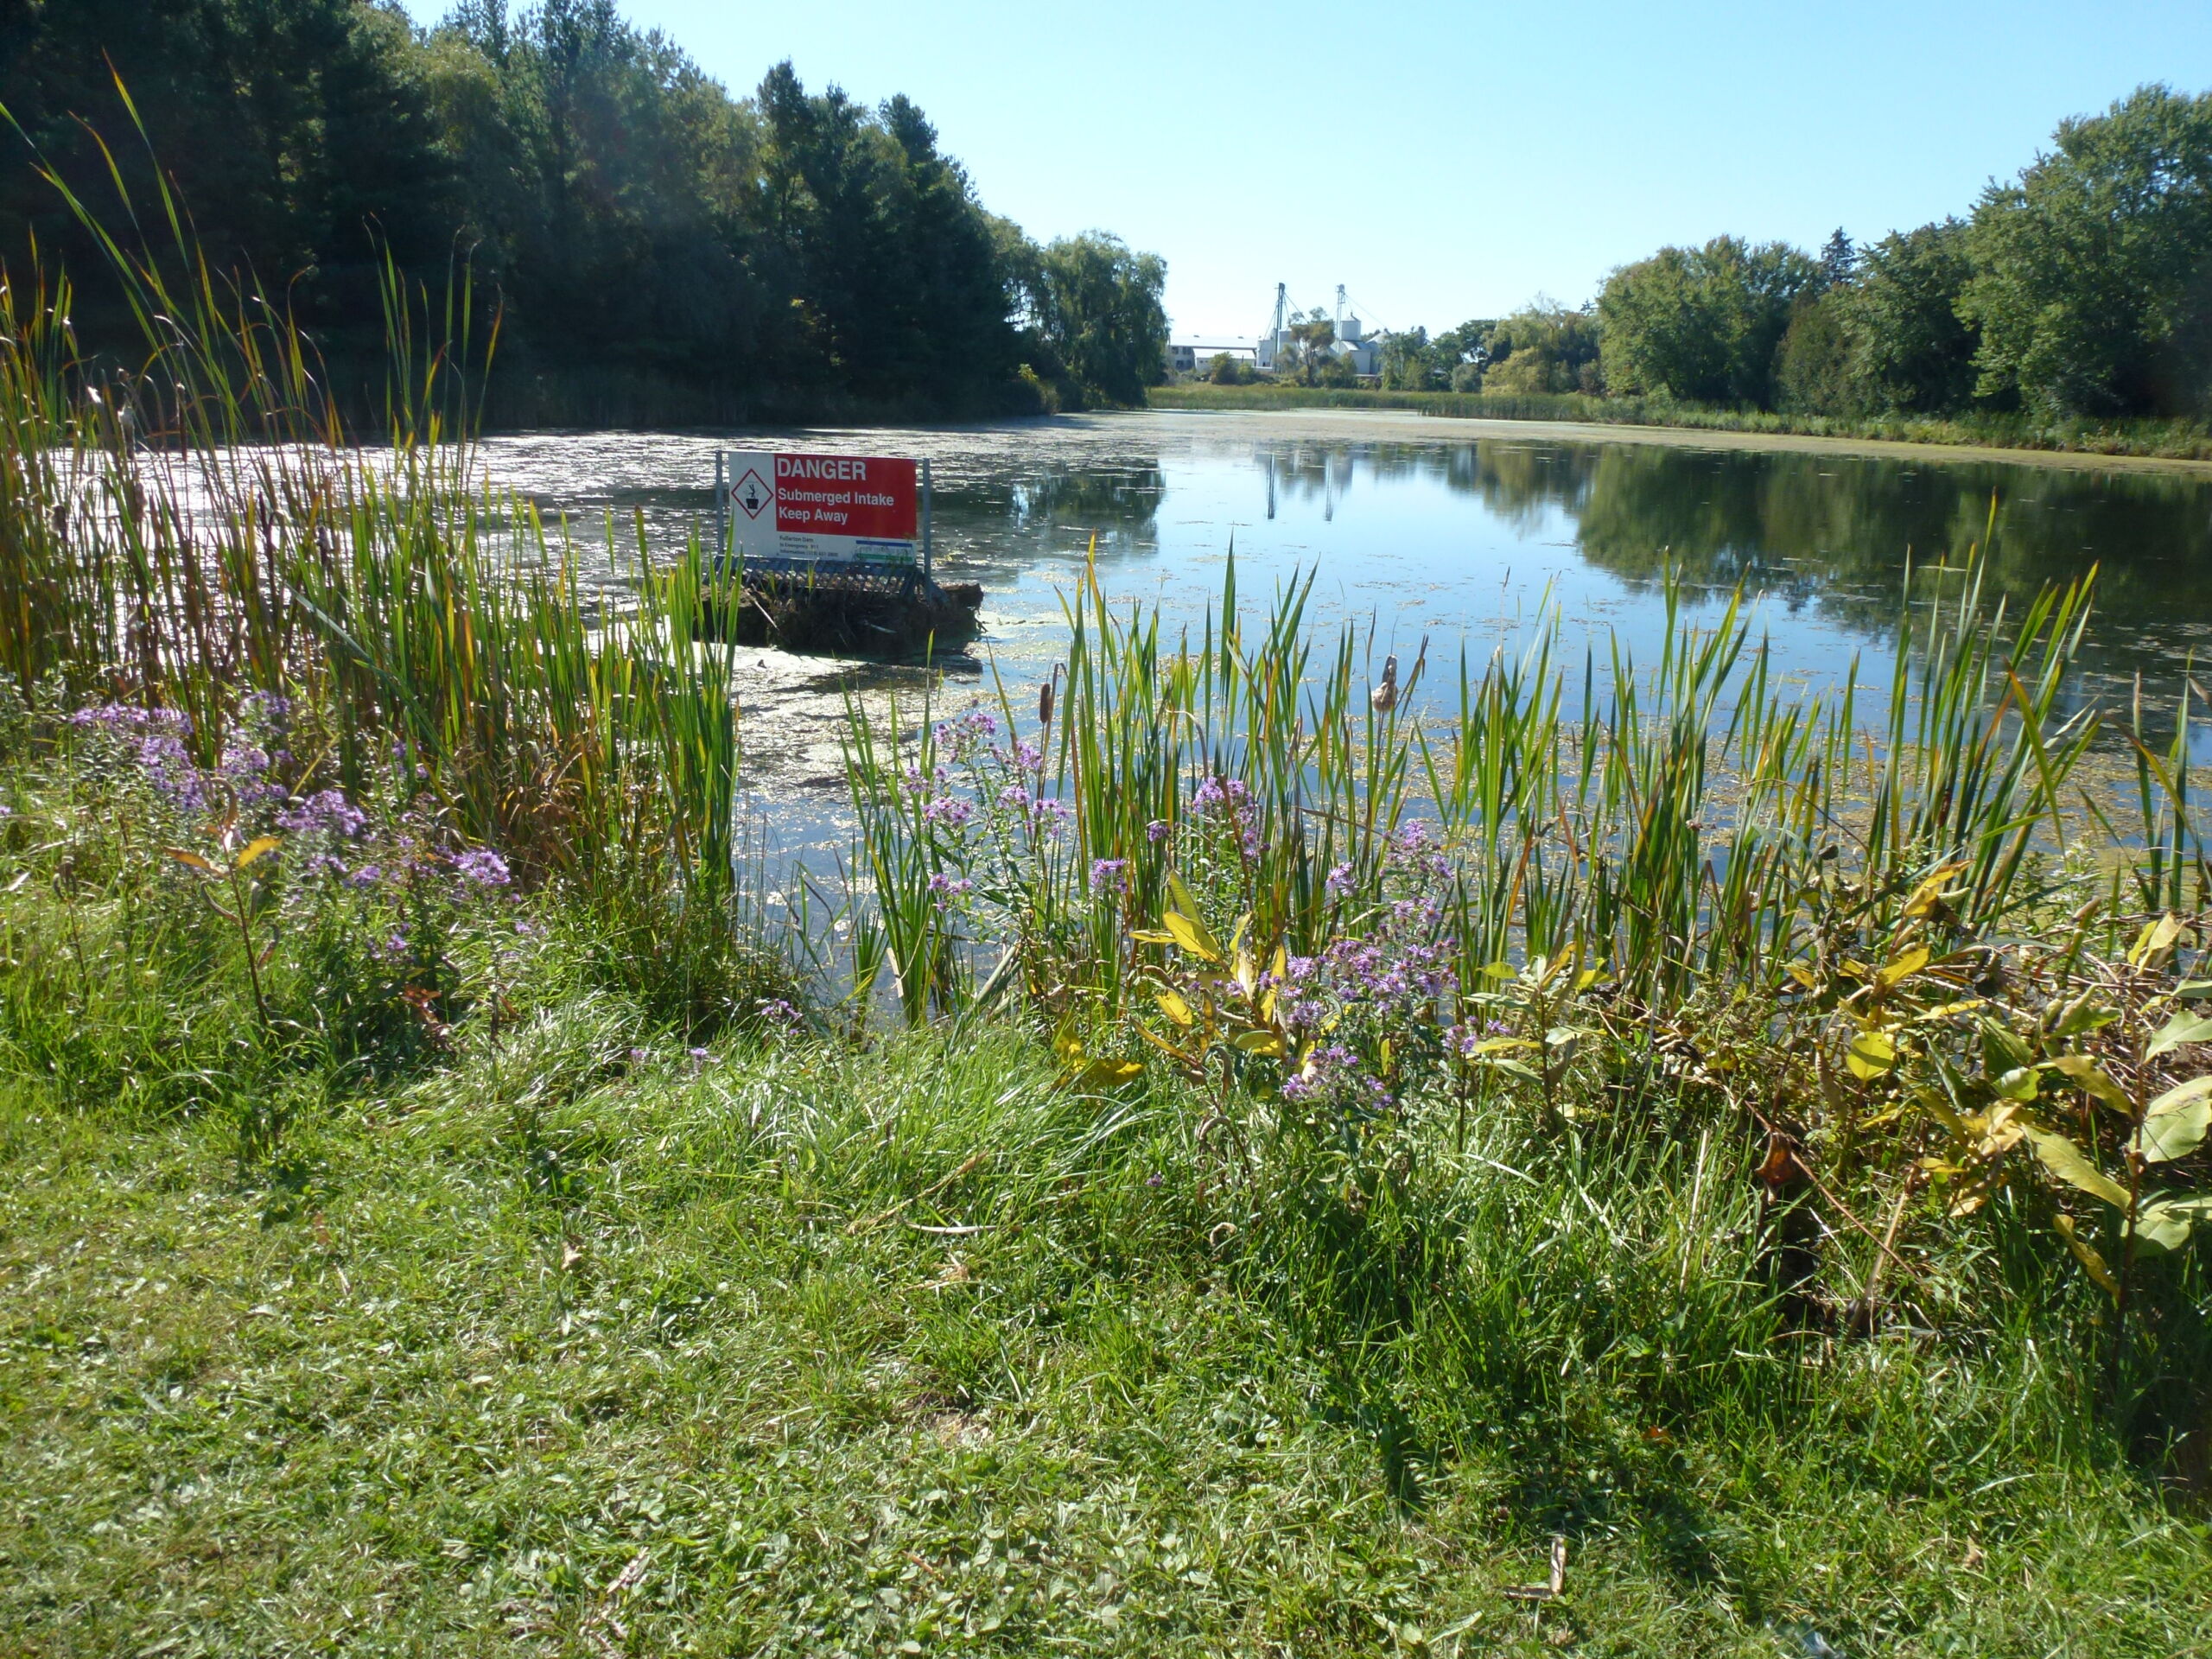 Grasses and flowers grow along the bank of a lake